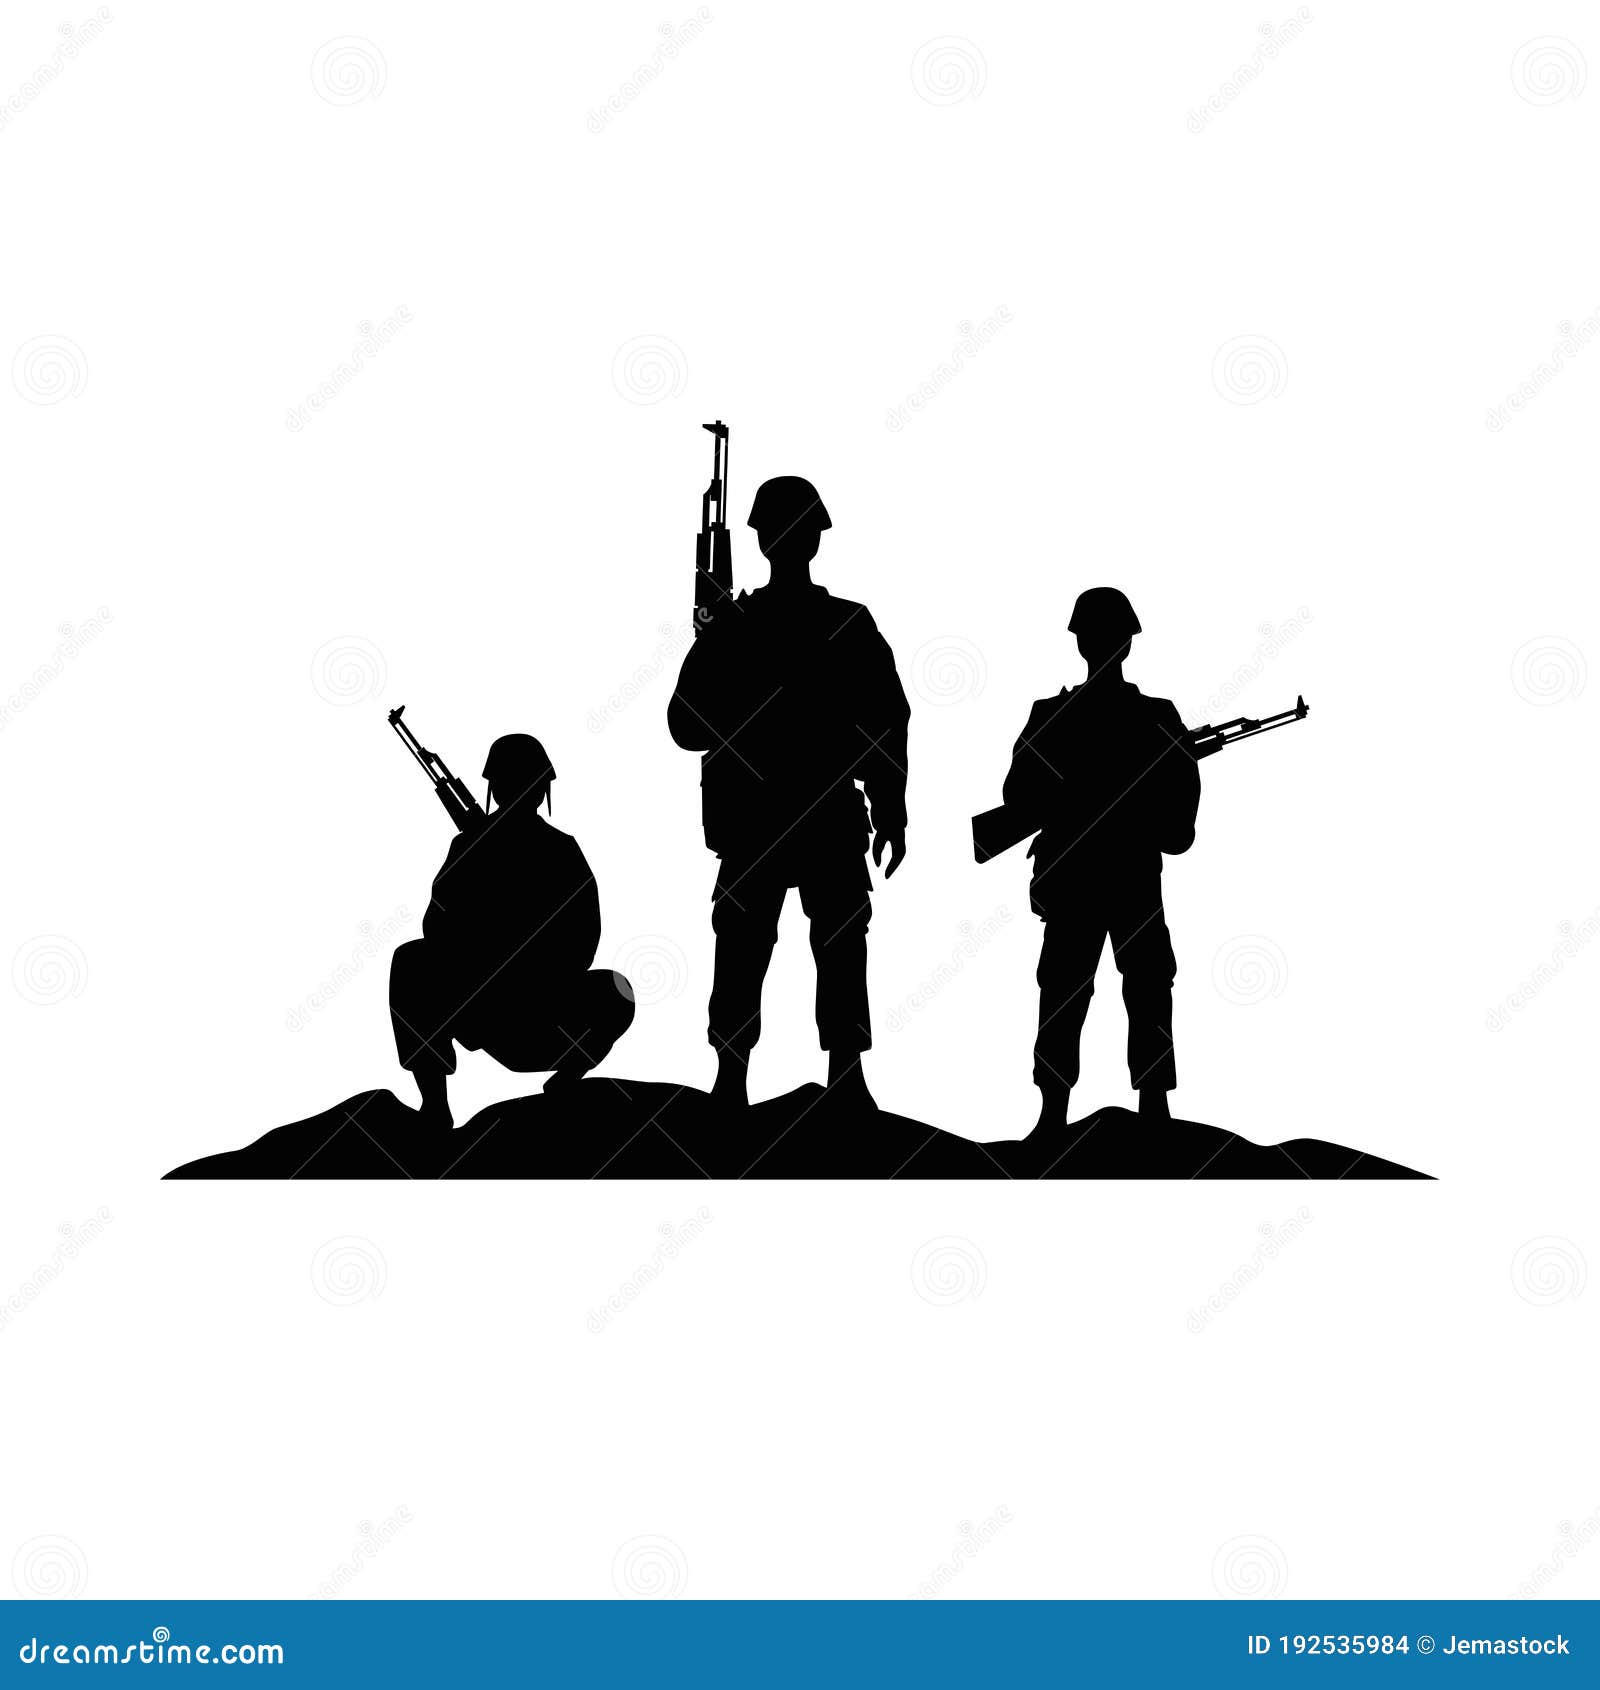 three soldiers military silhouettes figures